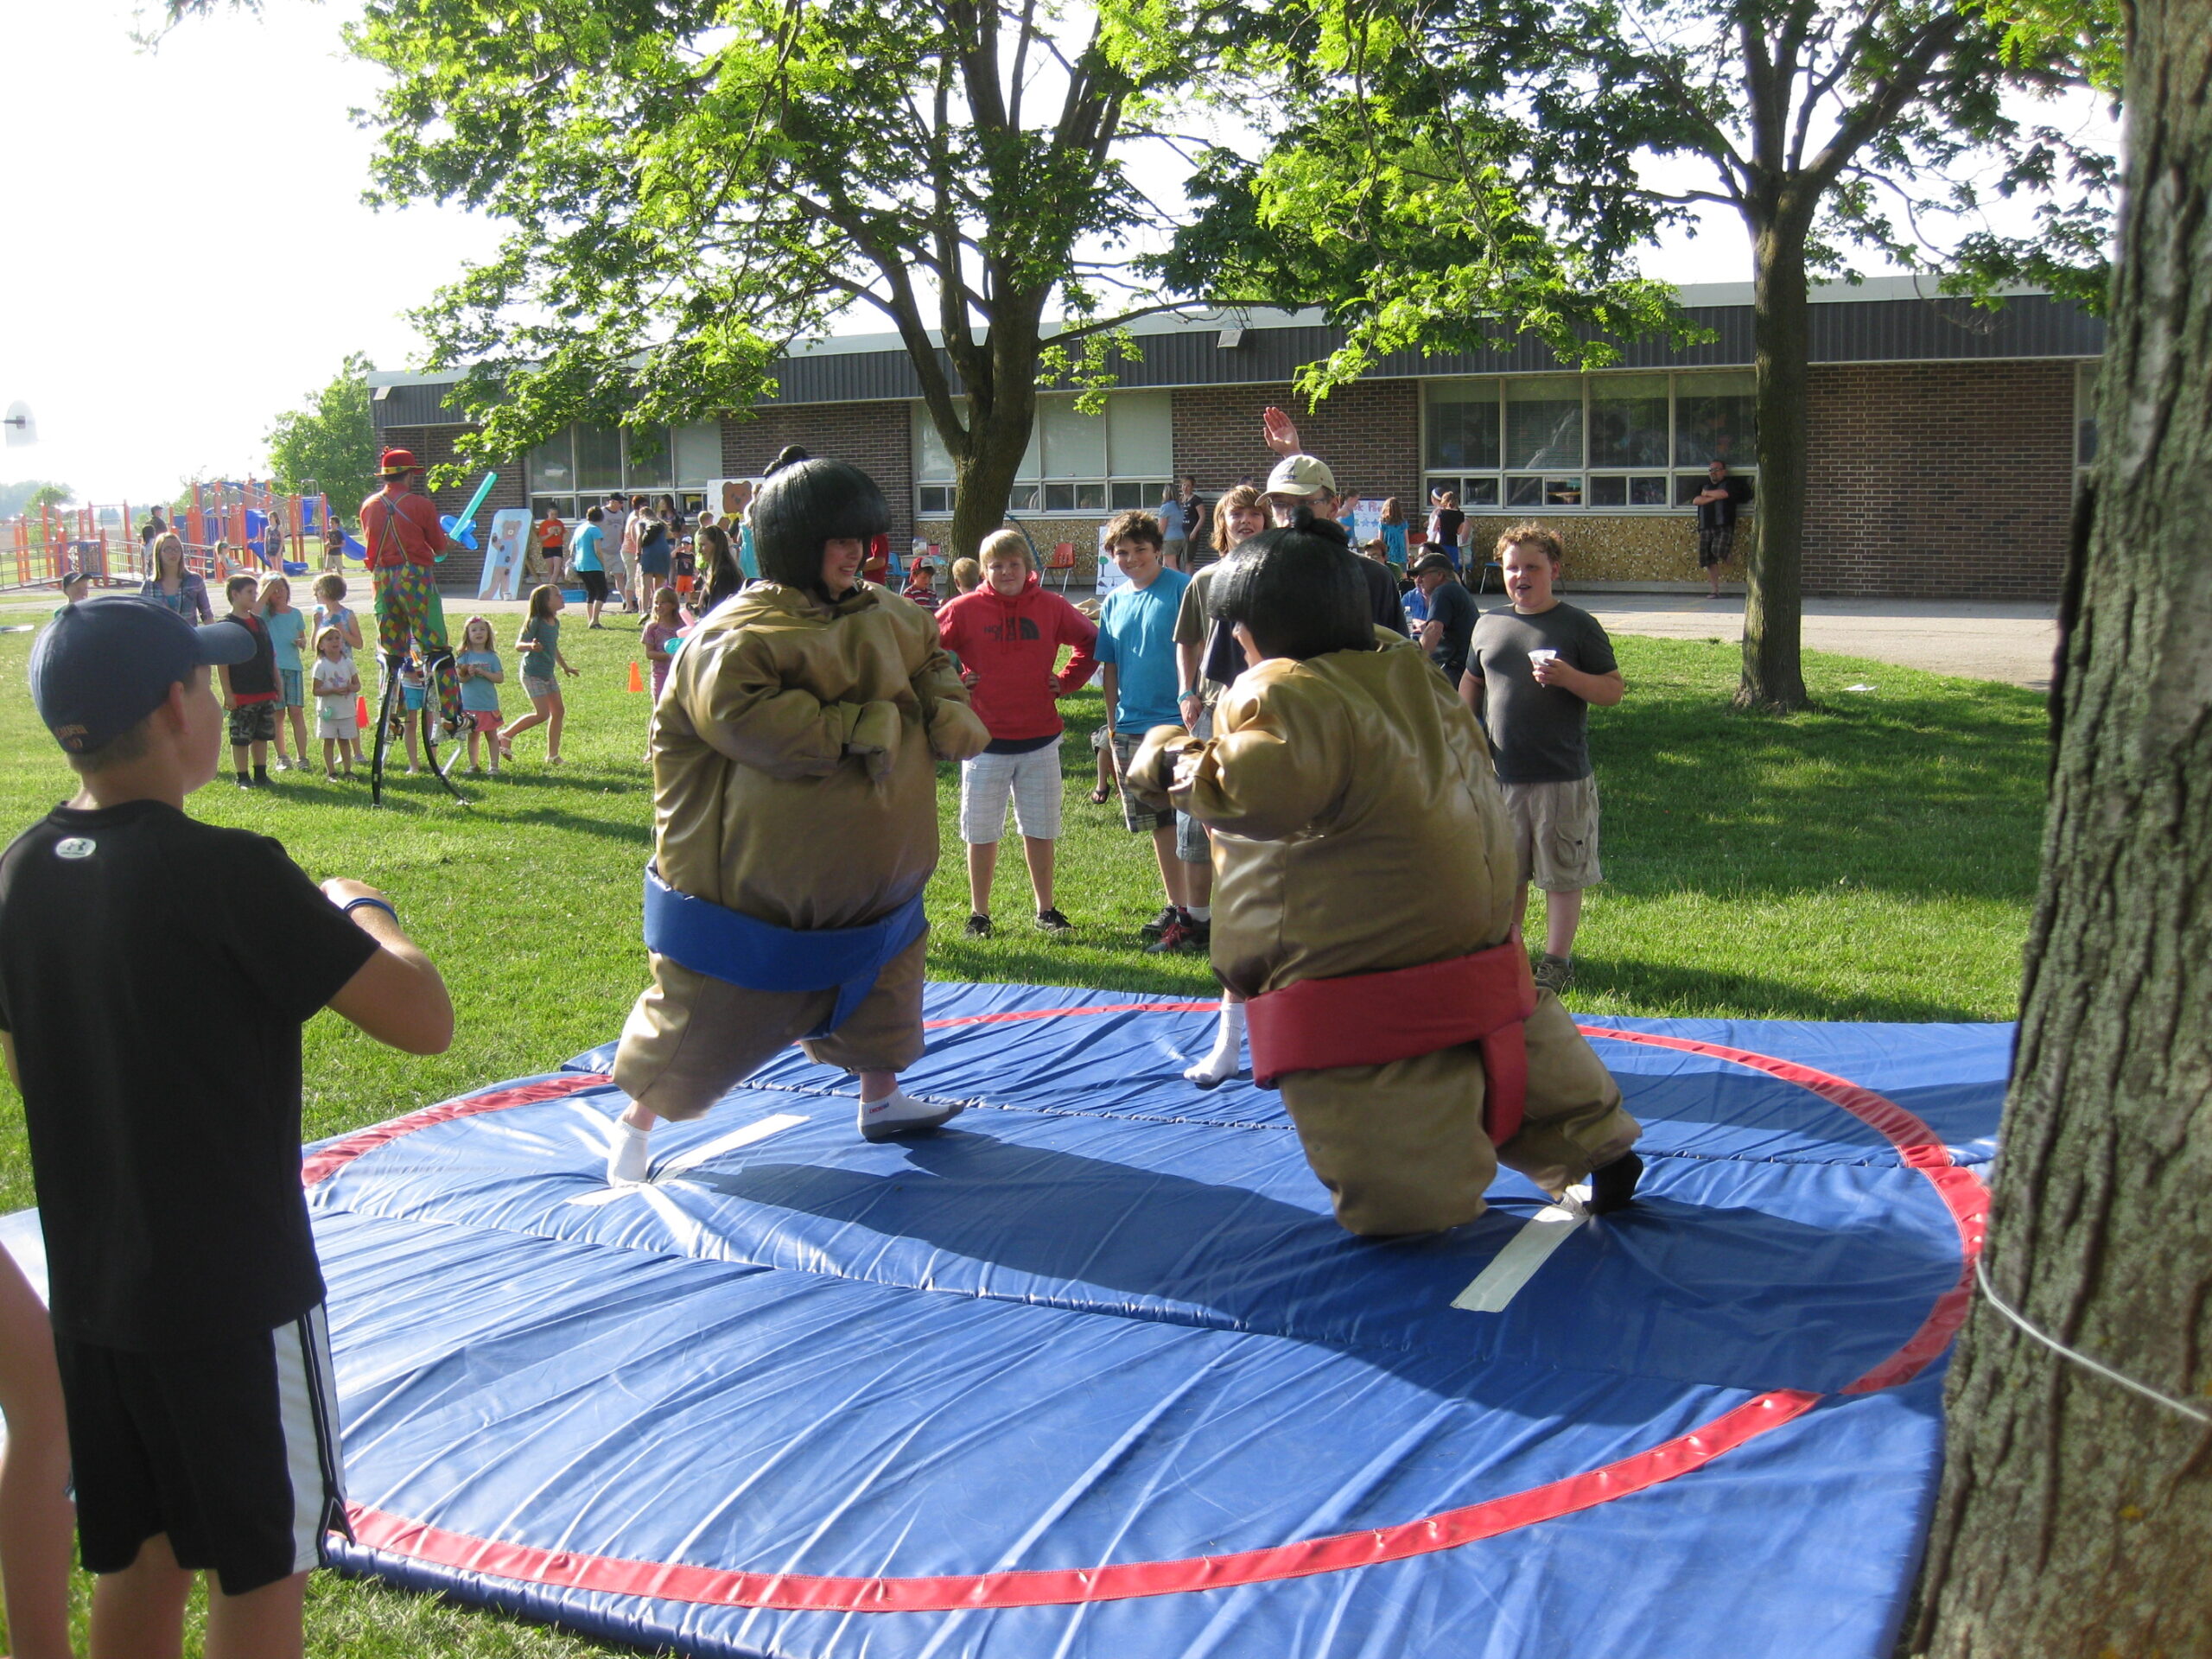 Two sumo wrestles in sumo suits competing at outdoor event